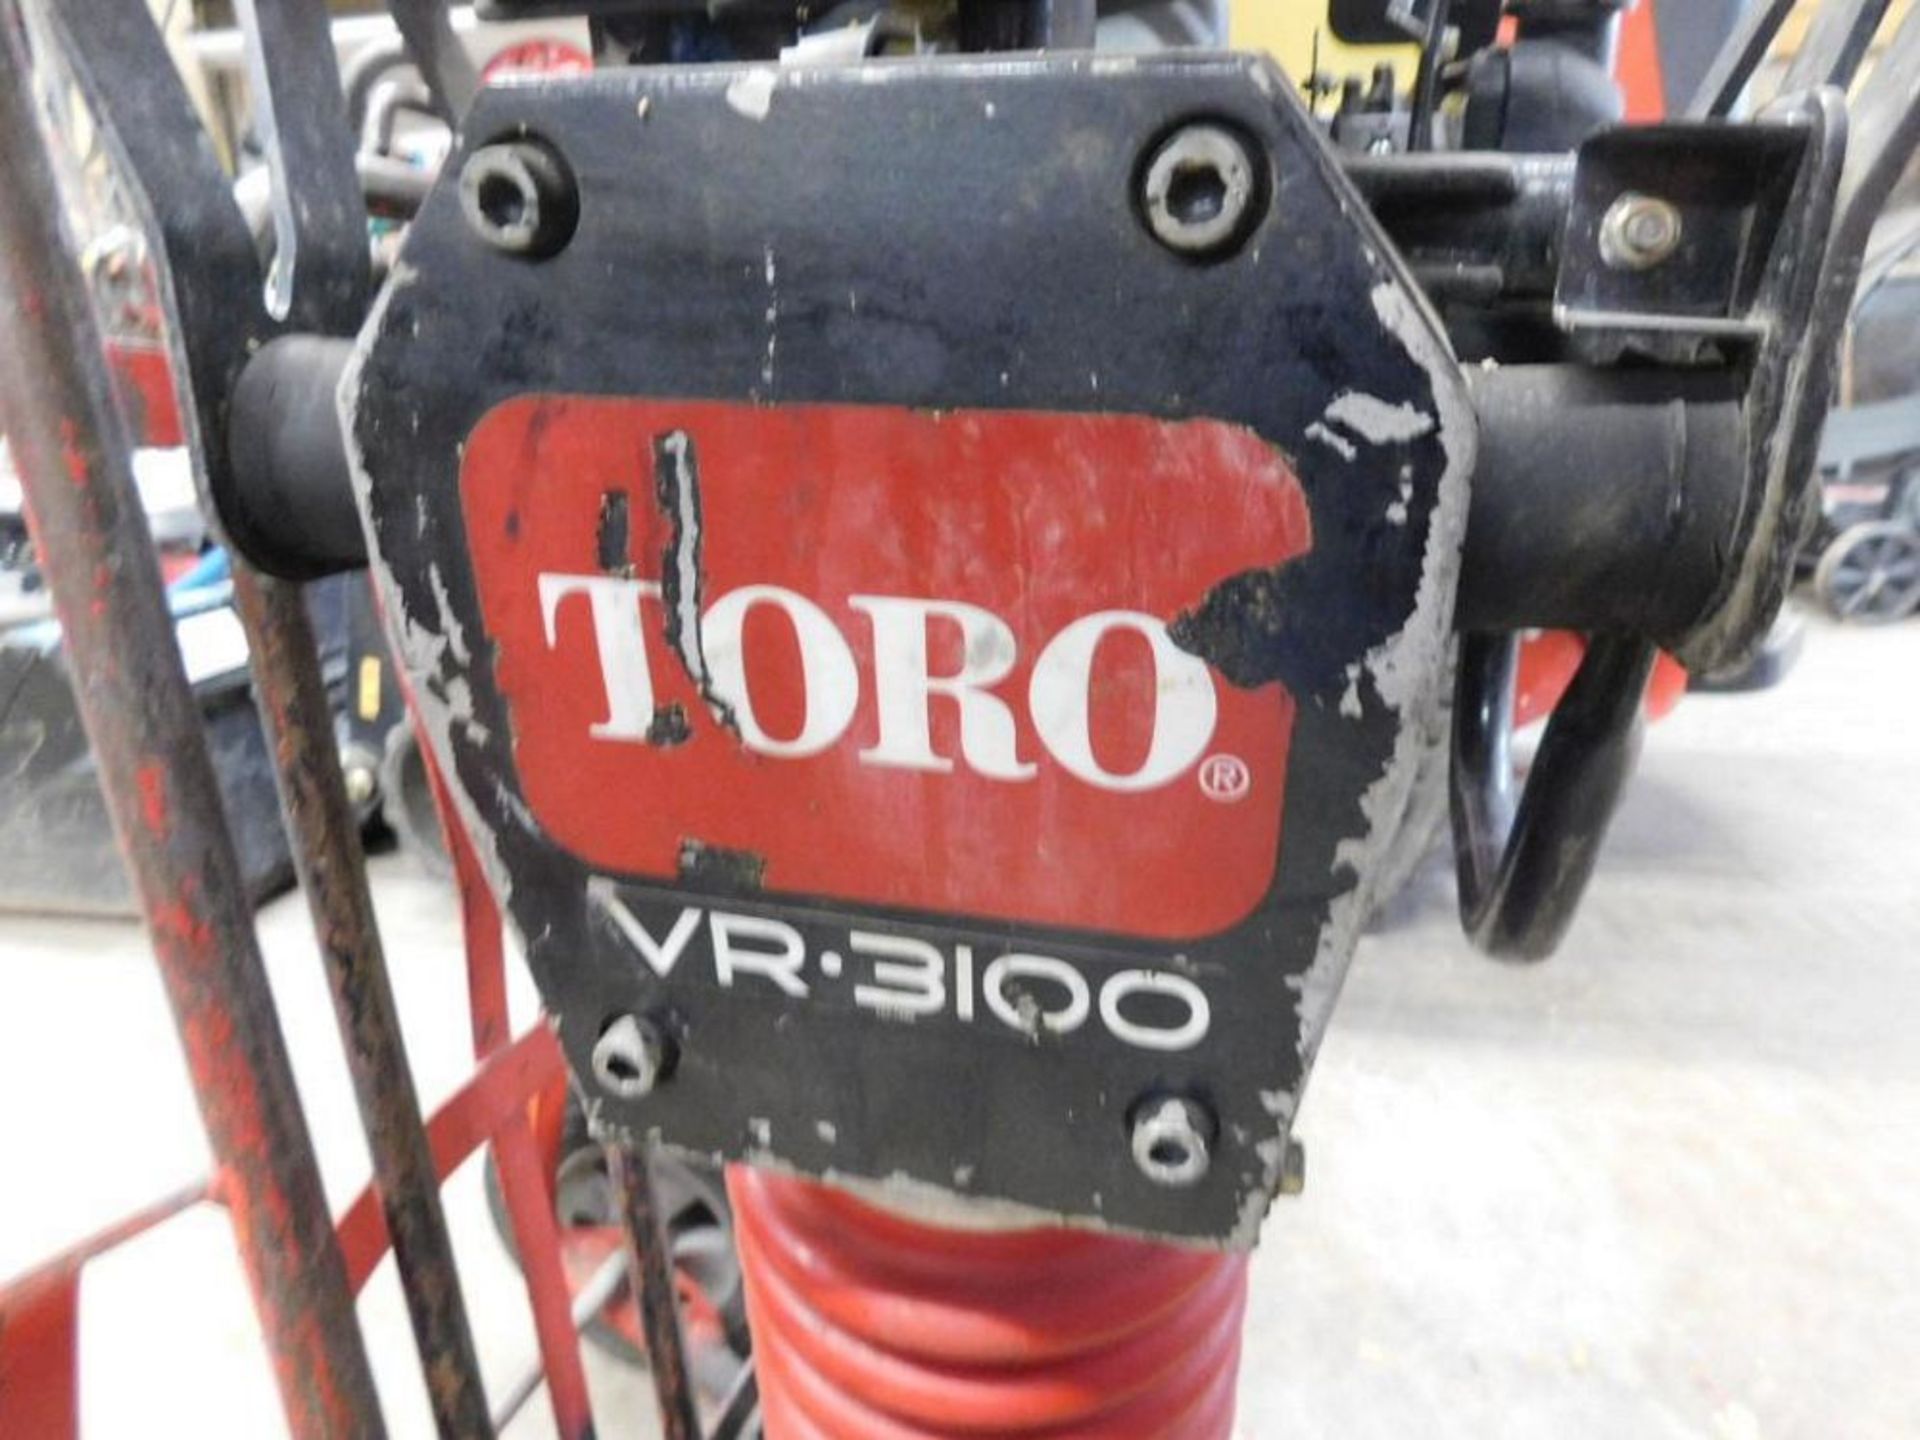 Toro WR-3100 Rammer Type Compactor (#10) (LOCATION: 318 N. Milwaukee Ave., Wheeling, IL 60090) - Image 7 of 8